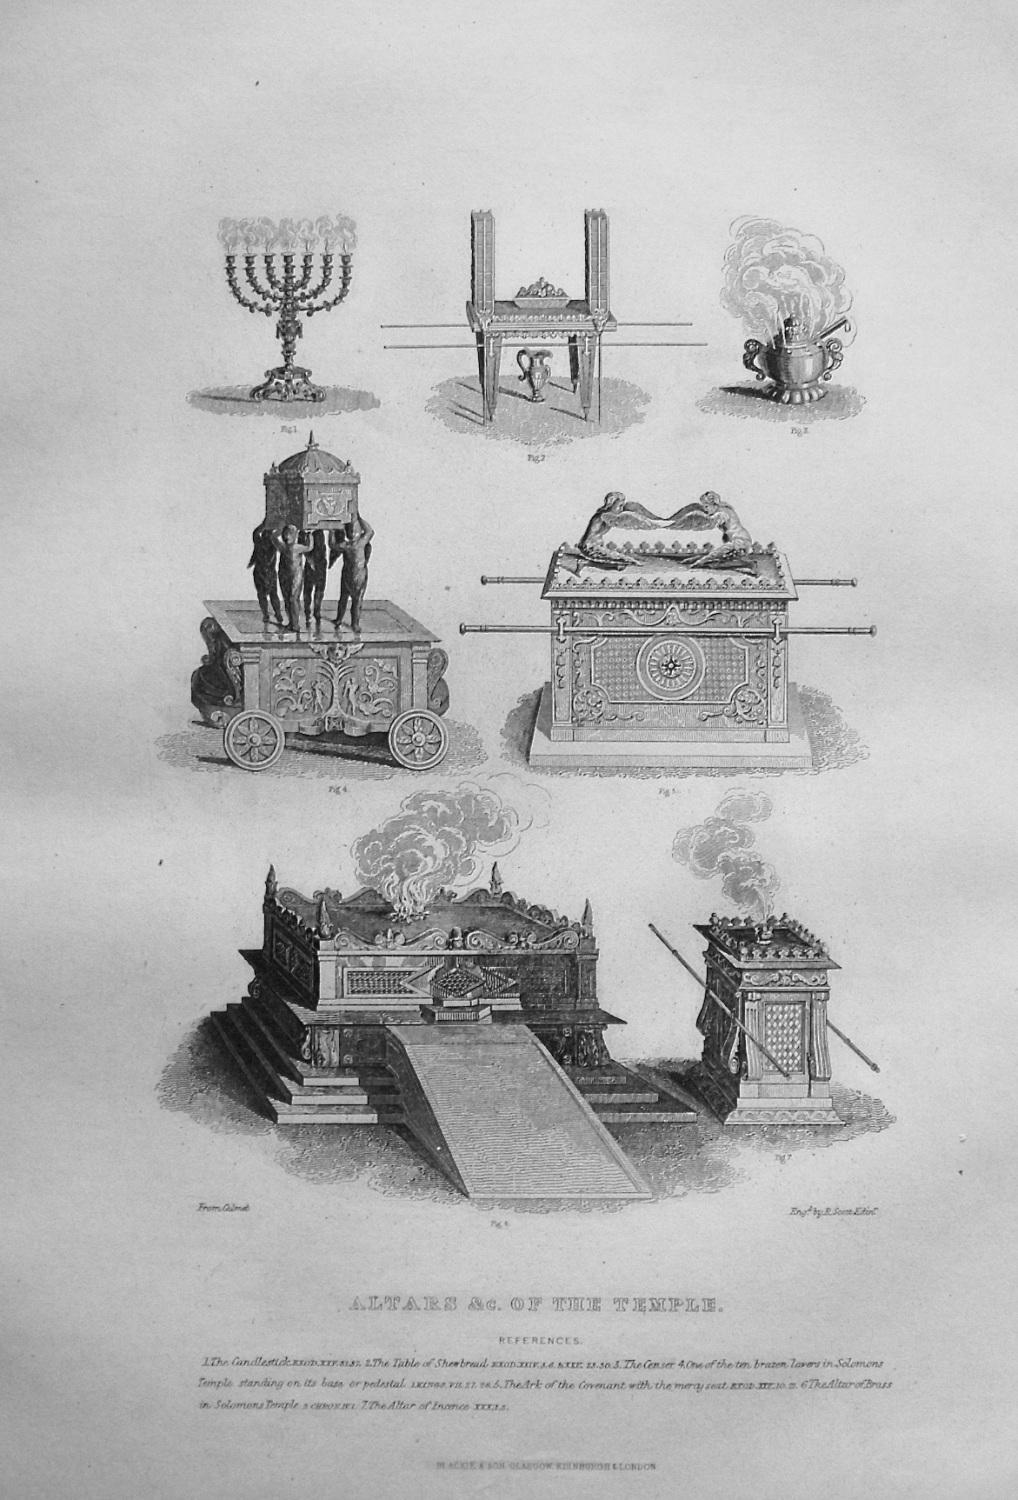 Altars & C. of the Temple. 1862.